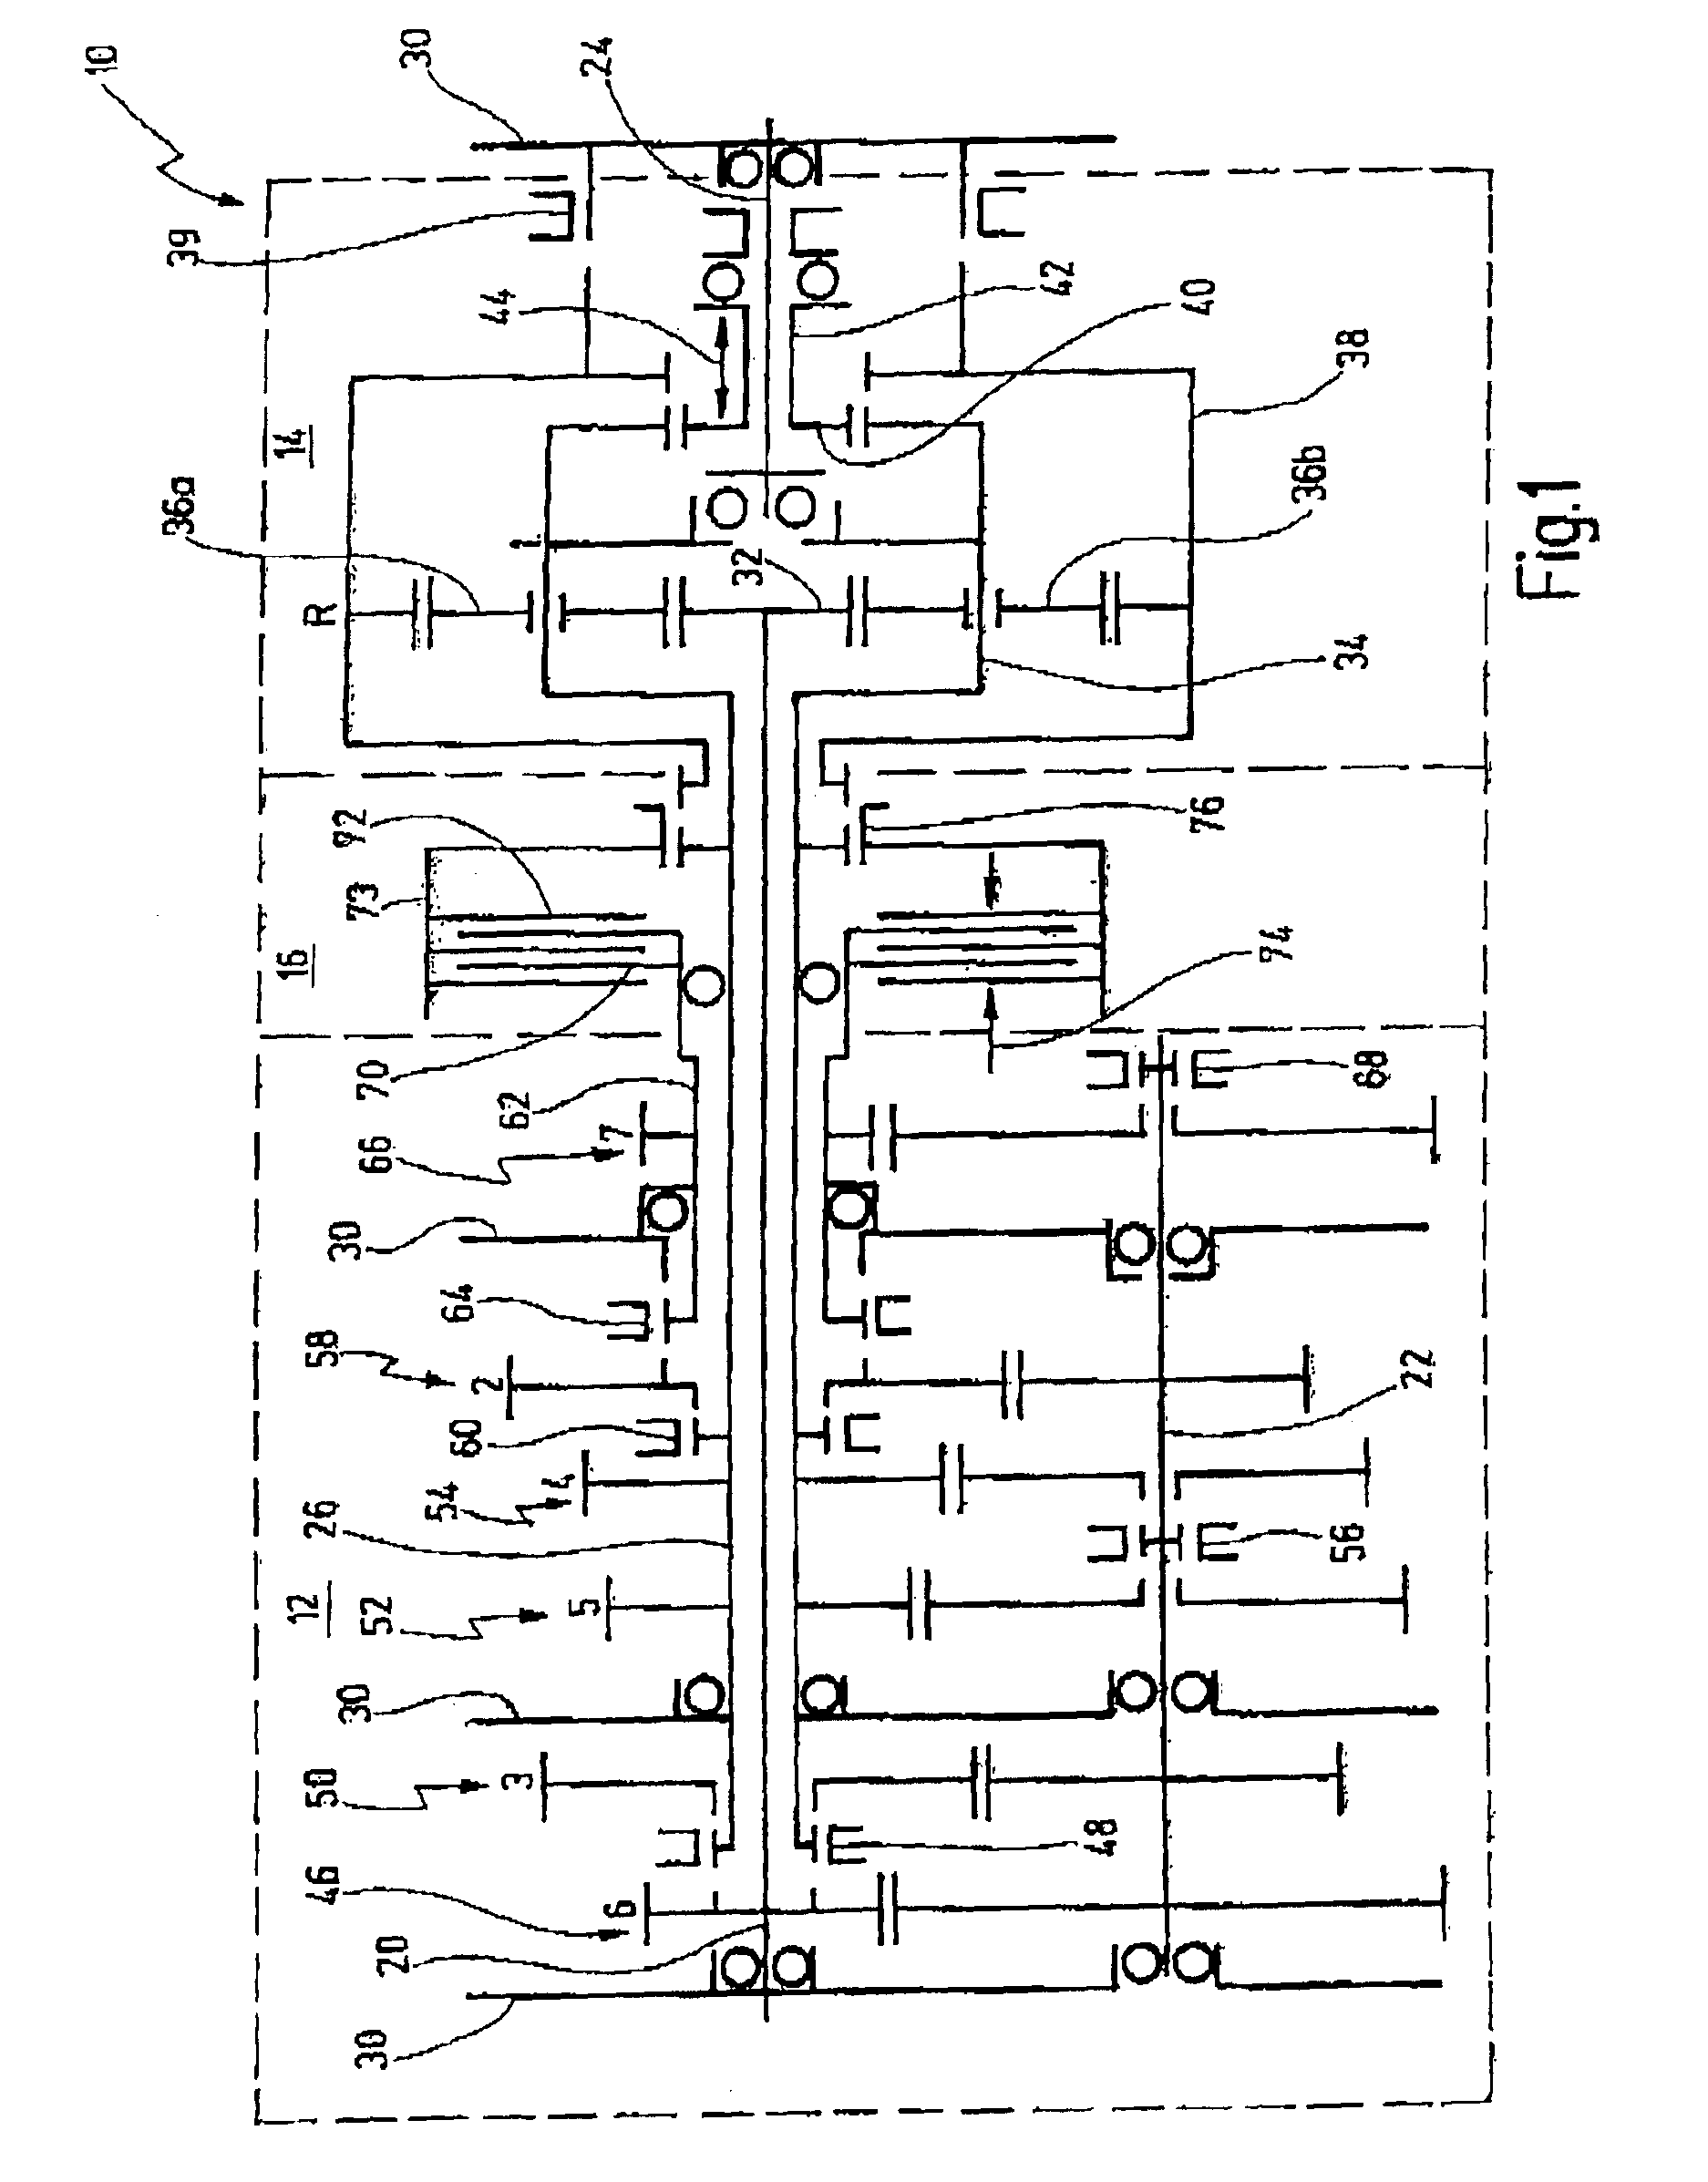 Automatic variable-speed transmission